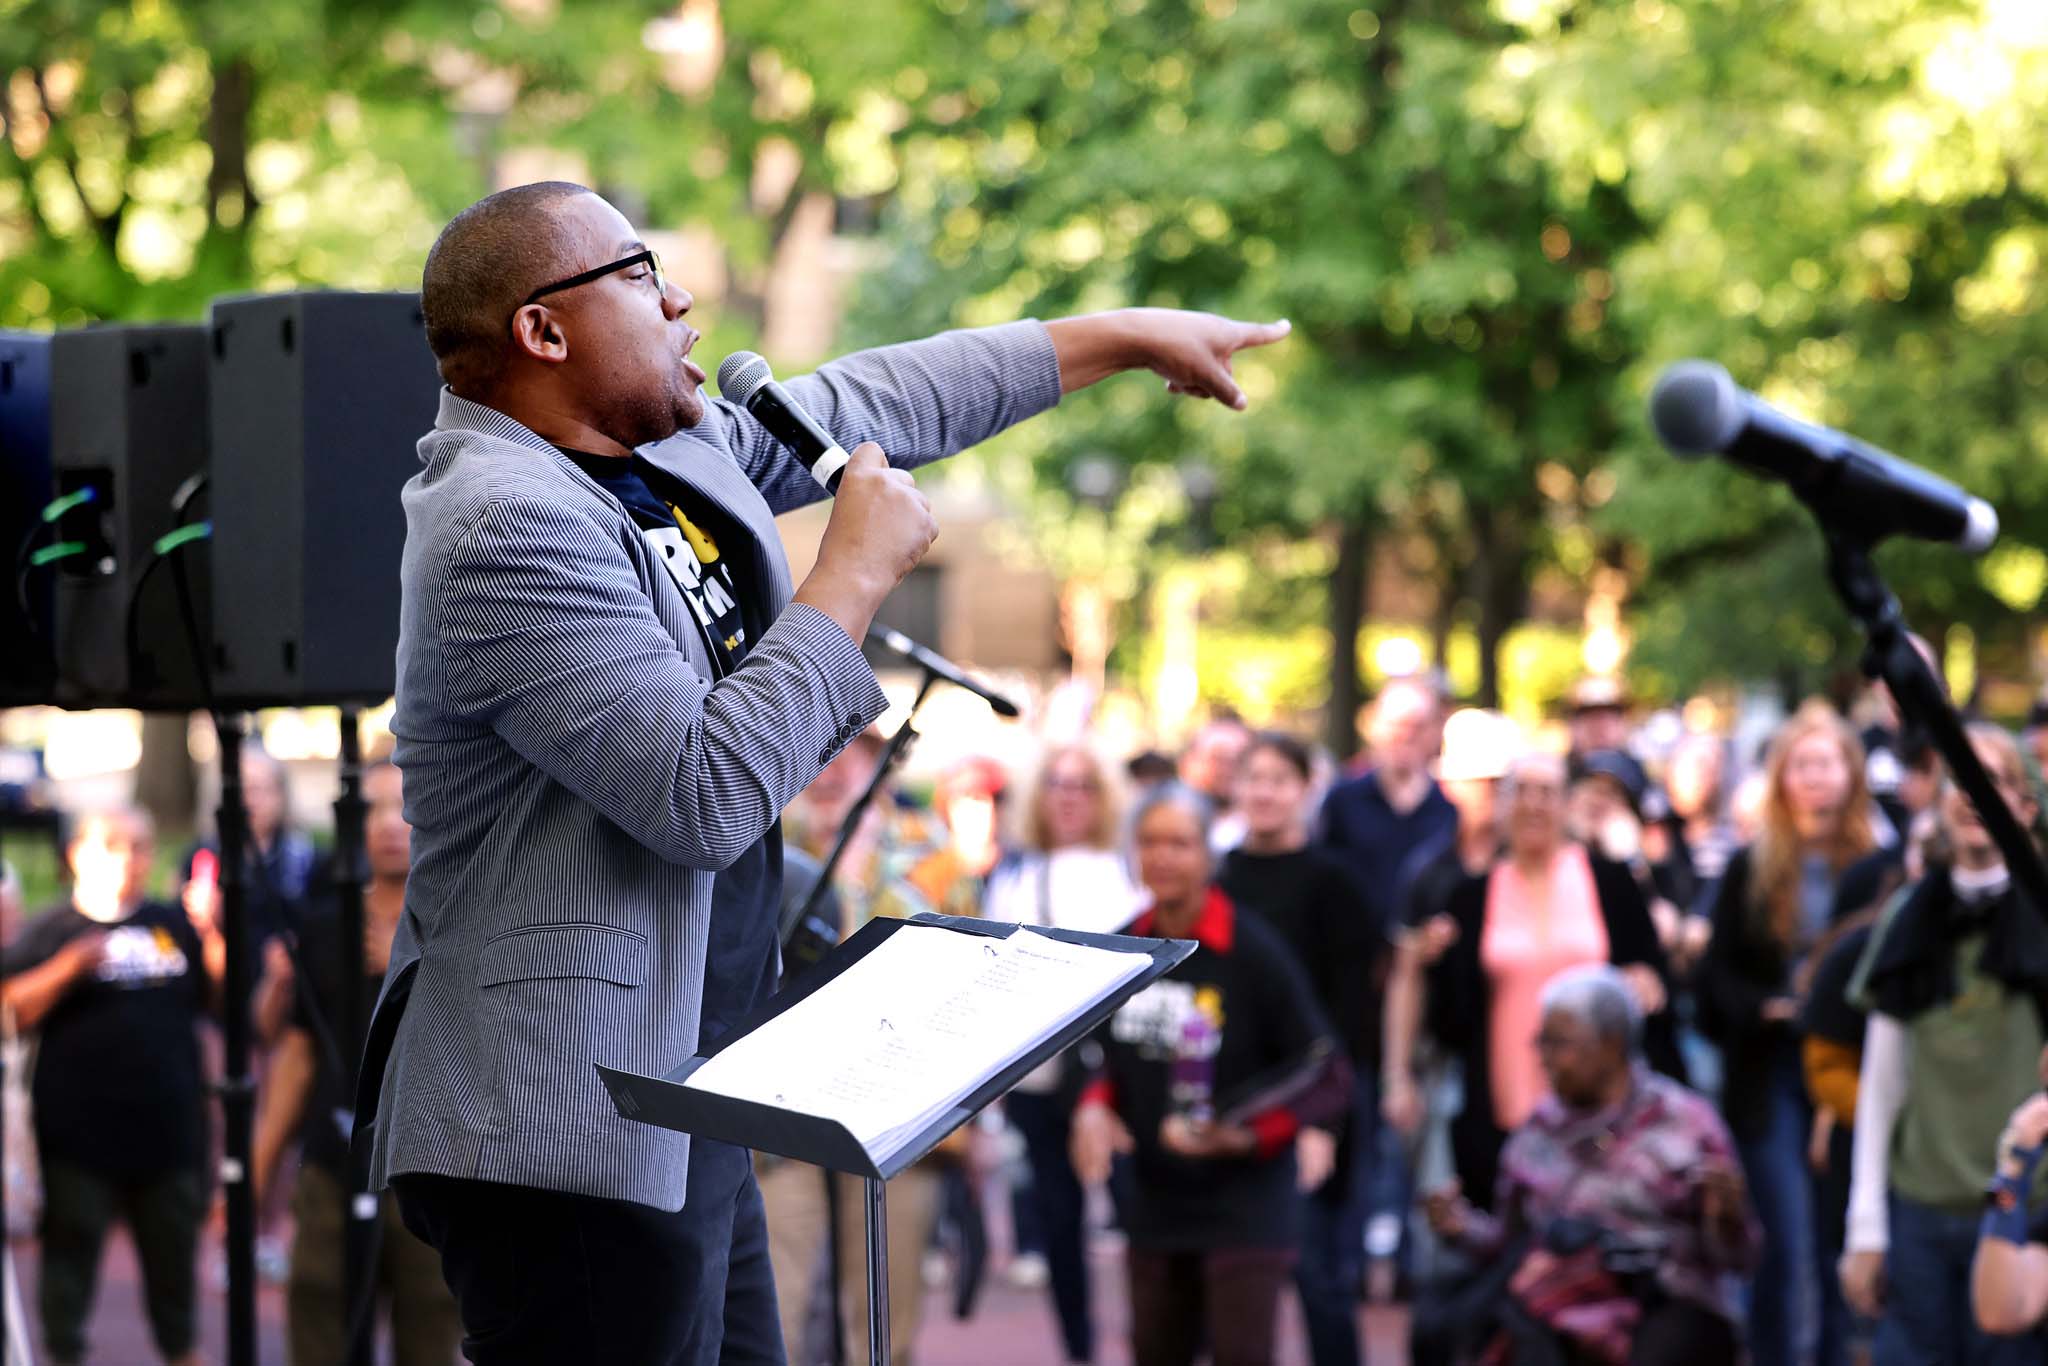 Eugene Rogers points into the crowd, speaking in a microphone from a stage on the Diag